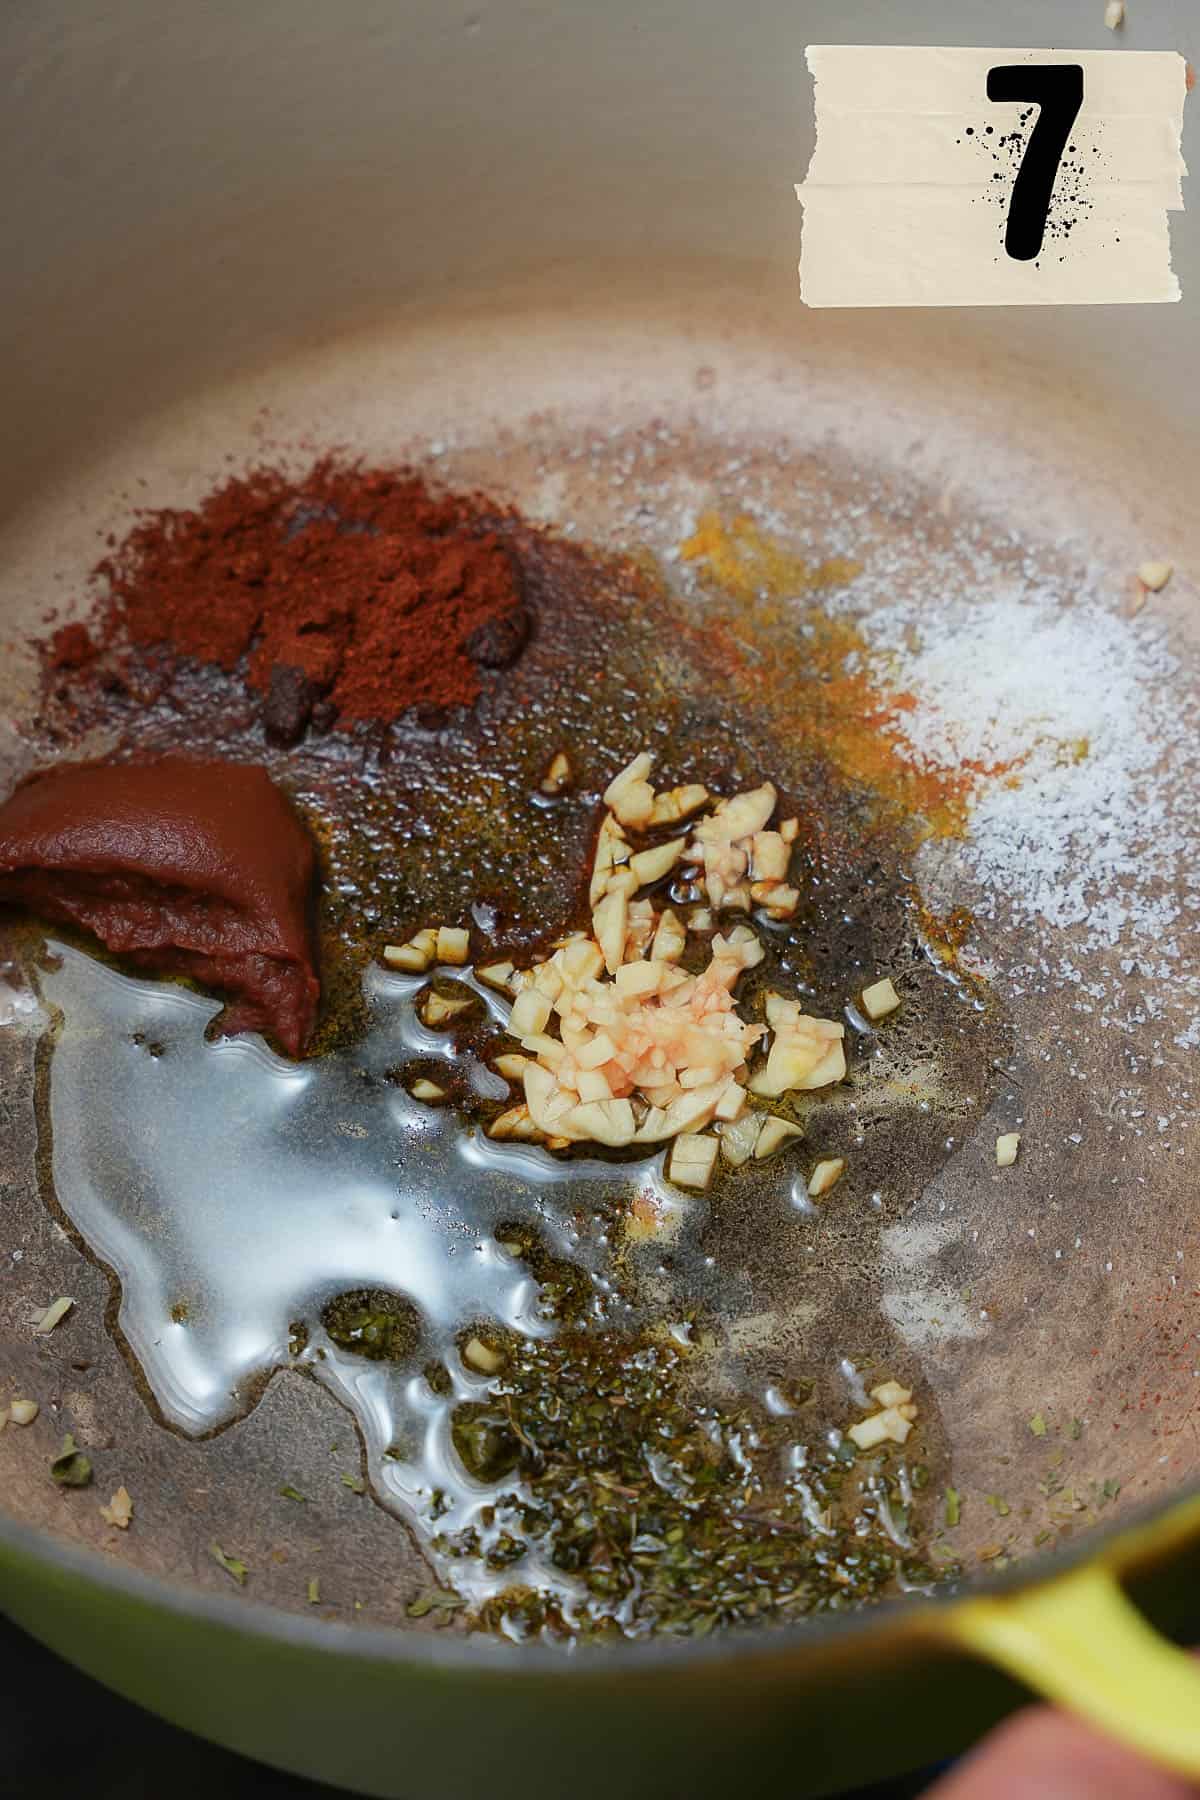 The base for the cooking liquid is mixed together in the bottom of a yellow pot.